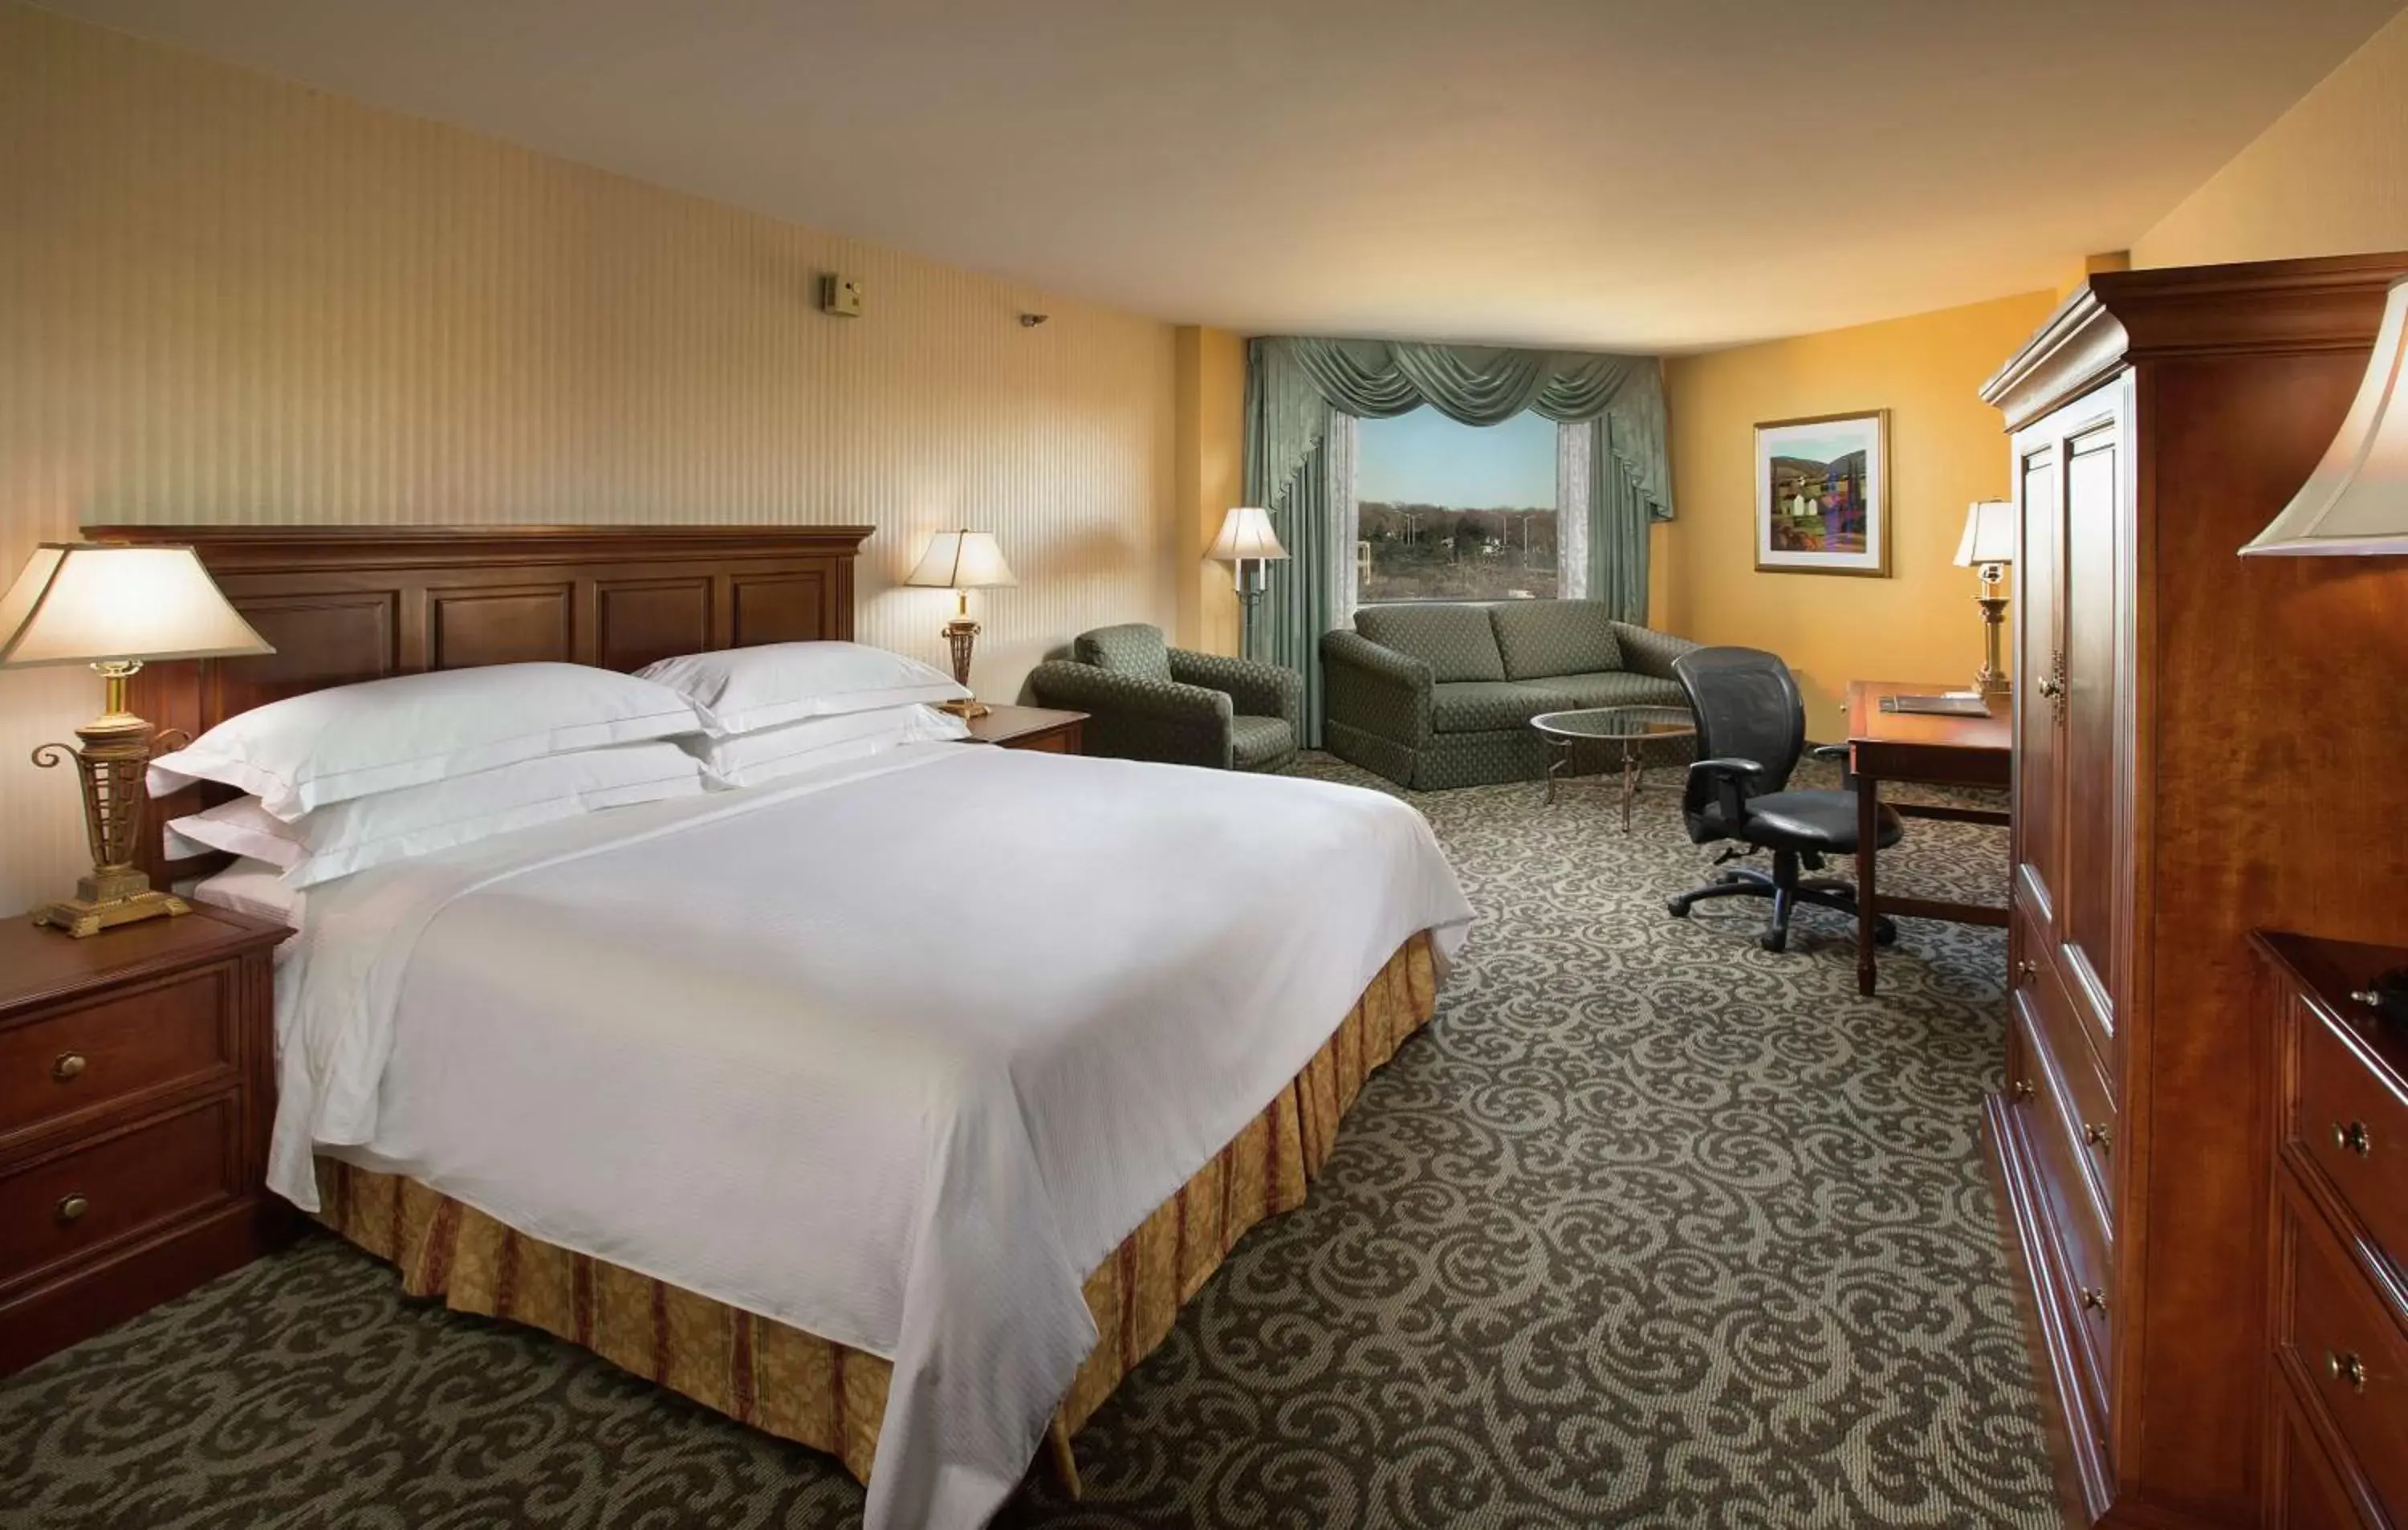 Bedroom in DoubleTree by Hilton Lisle Naperville